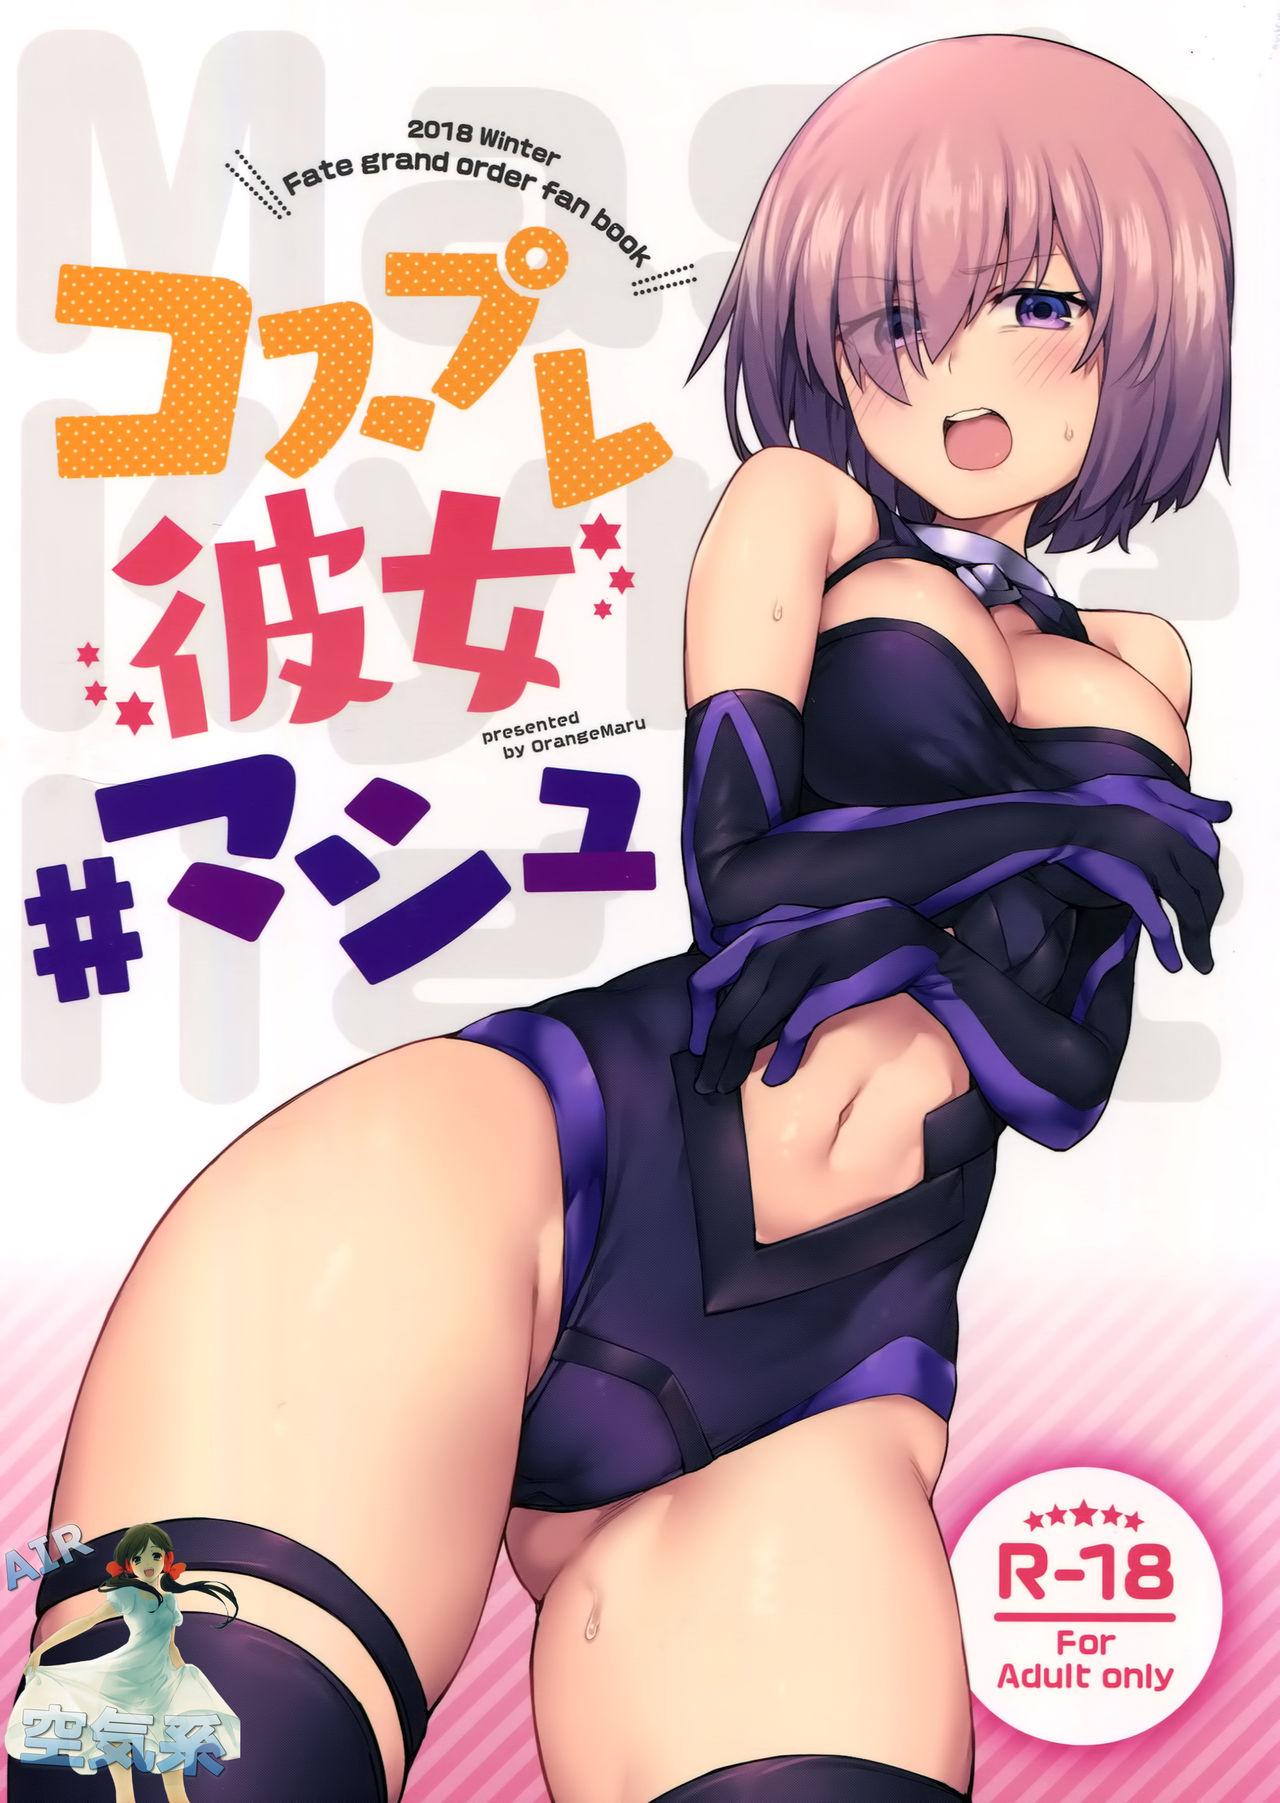 Throat Cosplay Kanojo #Mash - Fate grand order Girl - Page 2